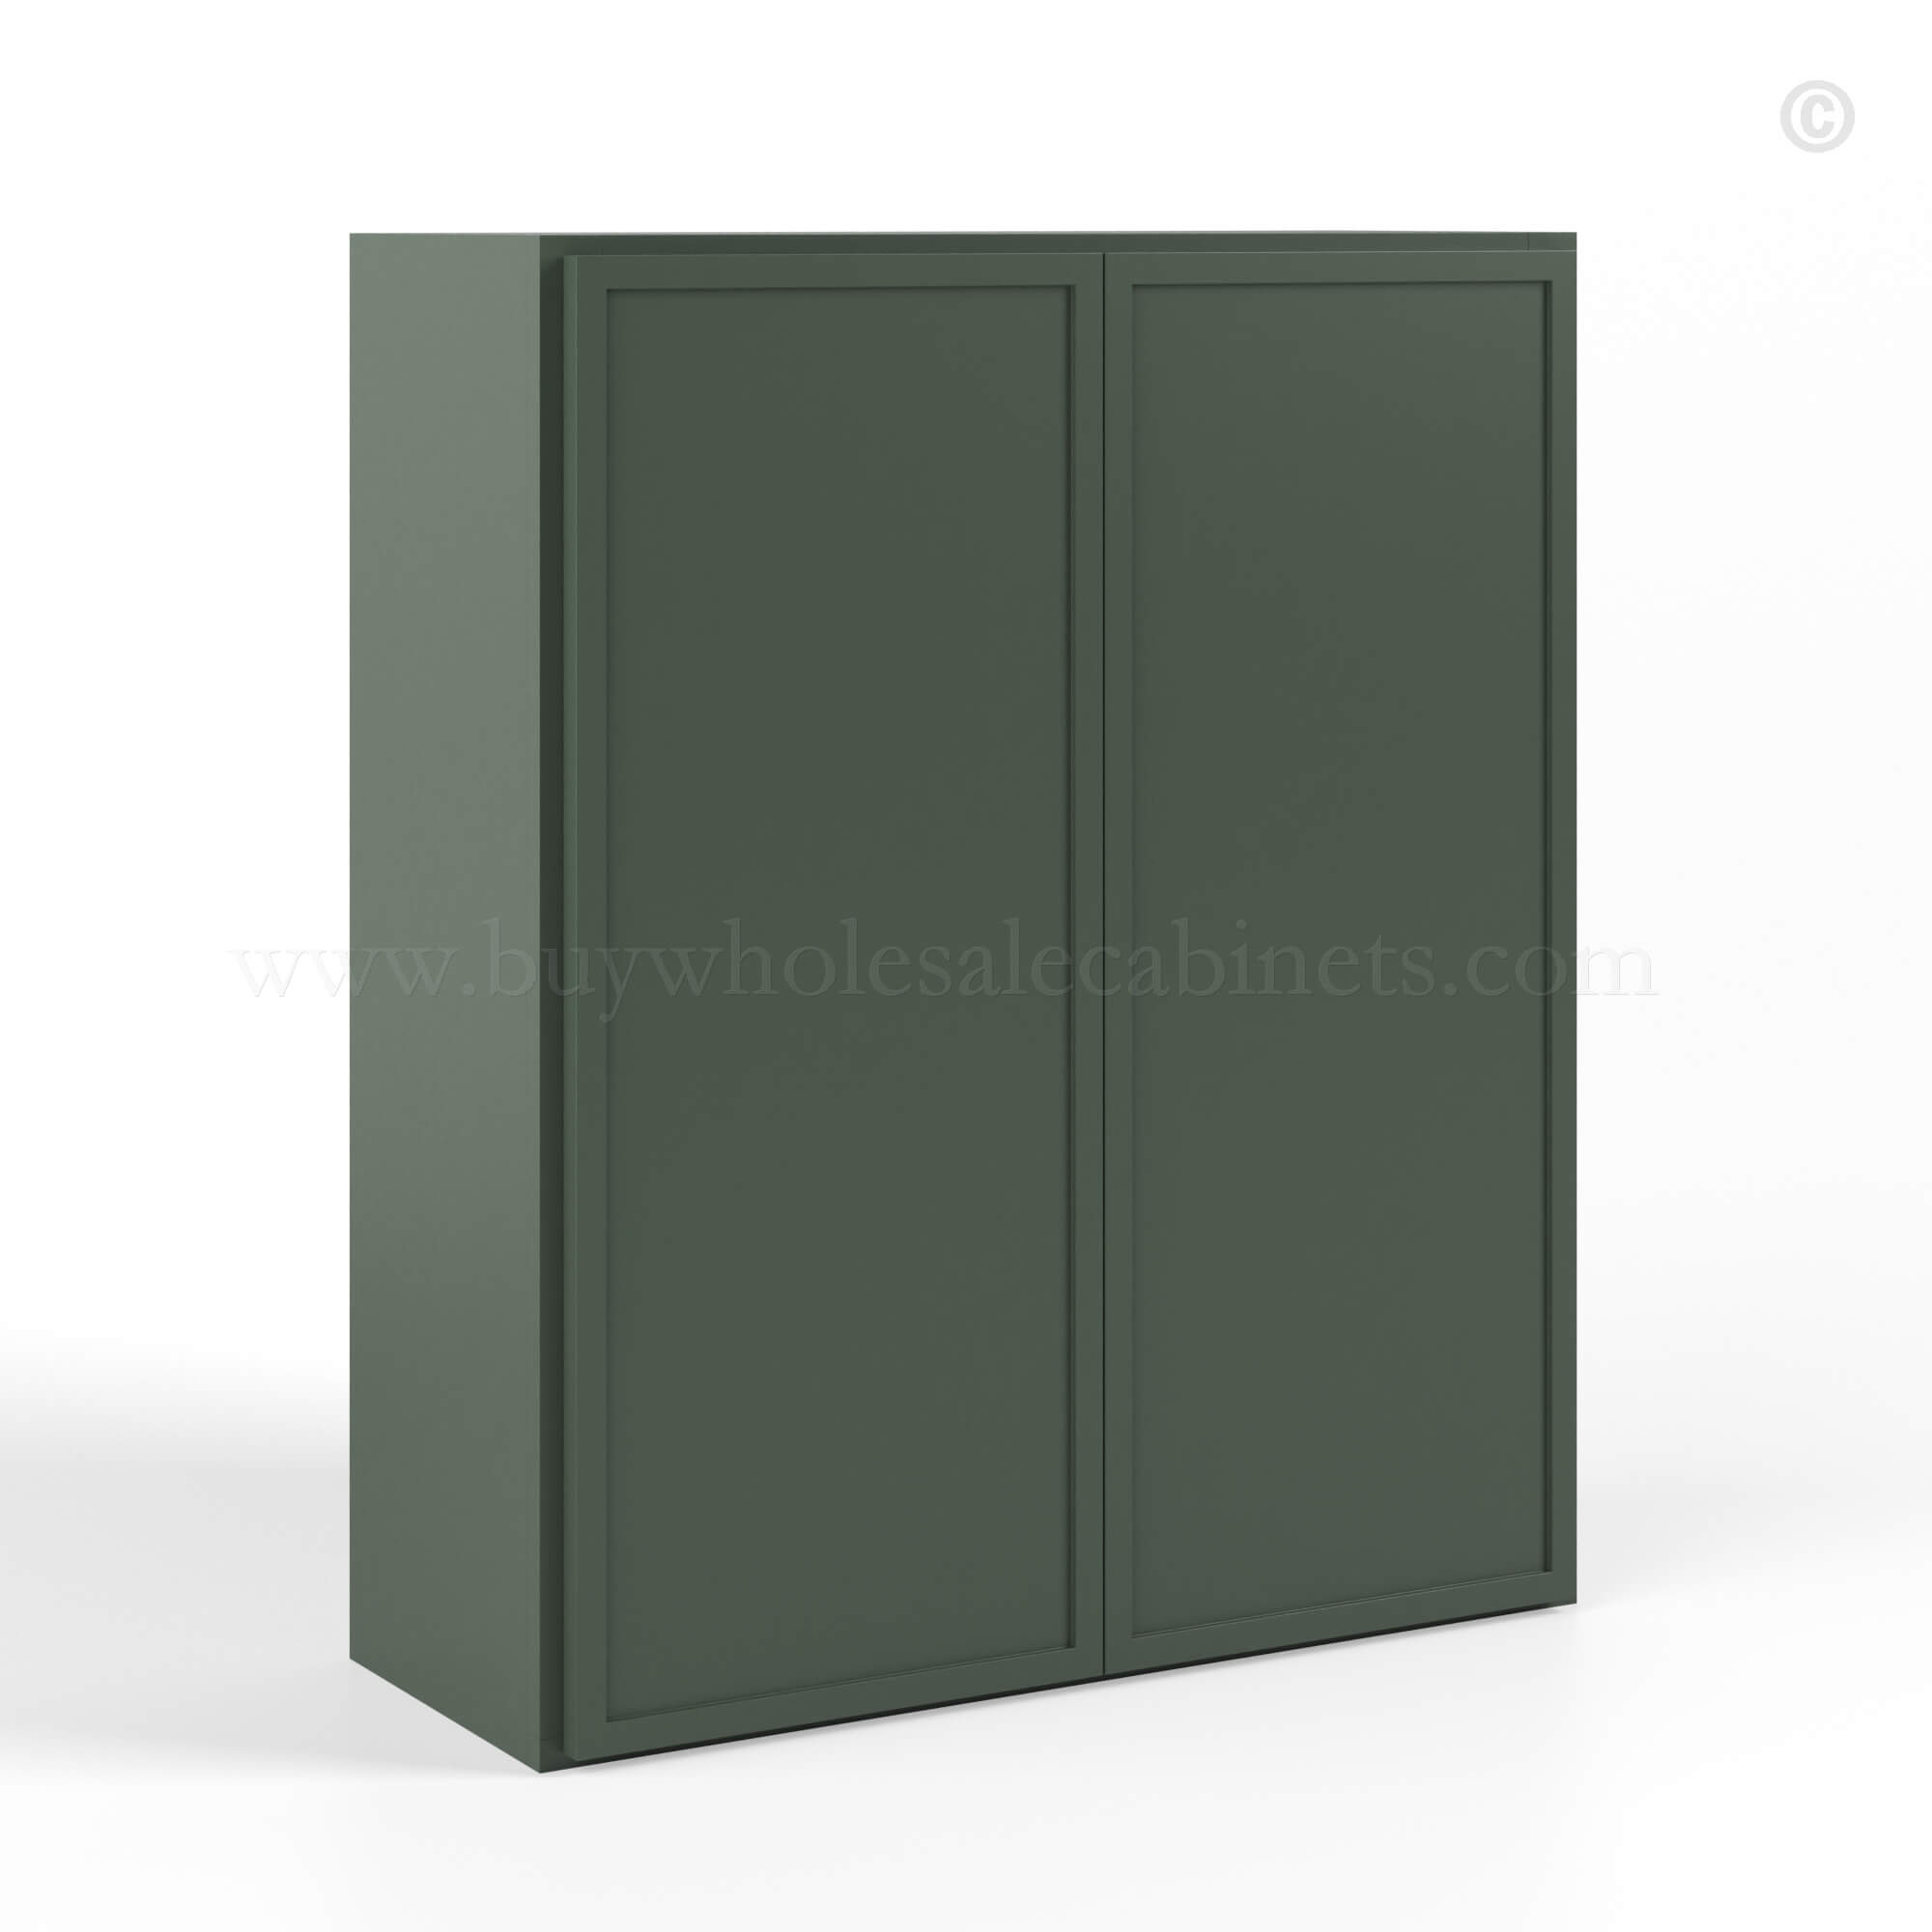 Slim Shaker Green Double Door Wall Cabinets 30″H, rta cabinets, wholesale cabinets